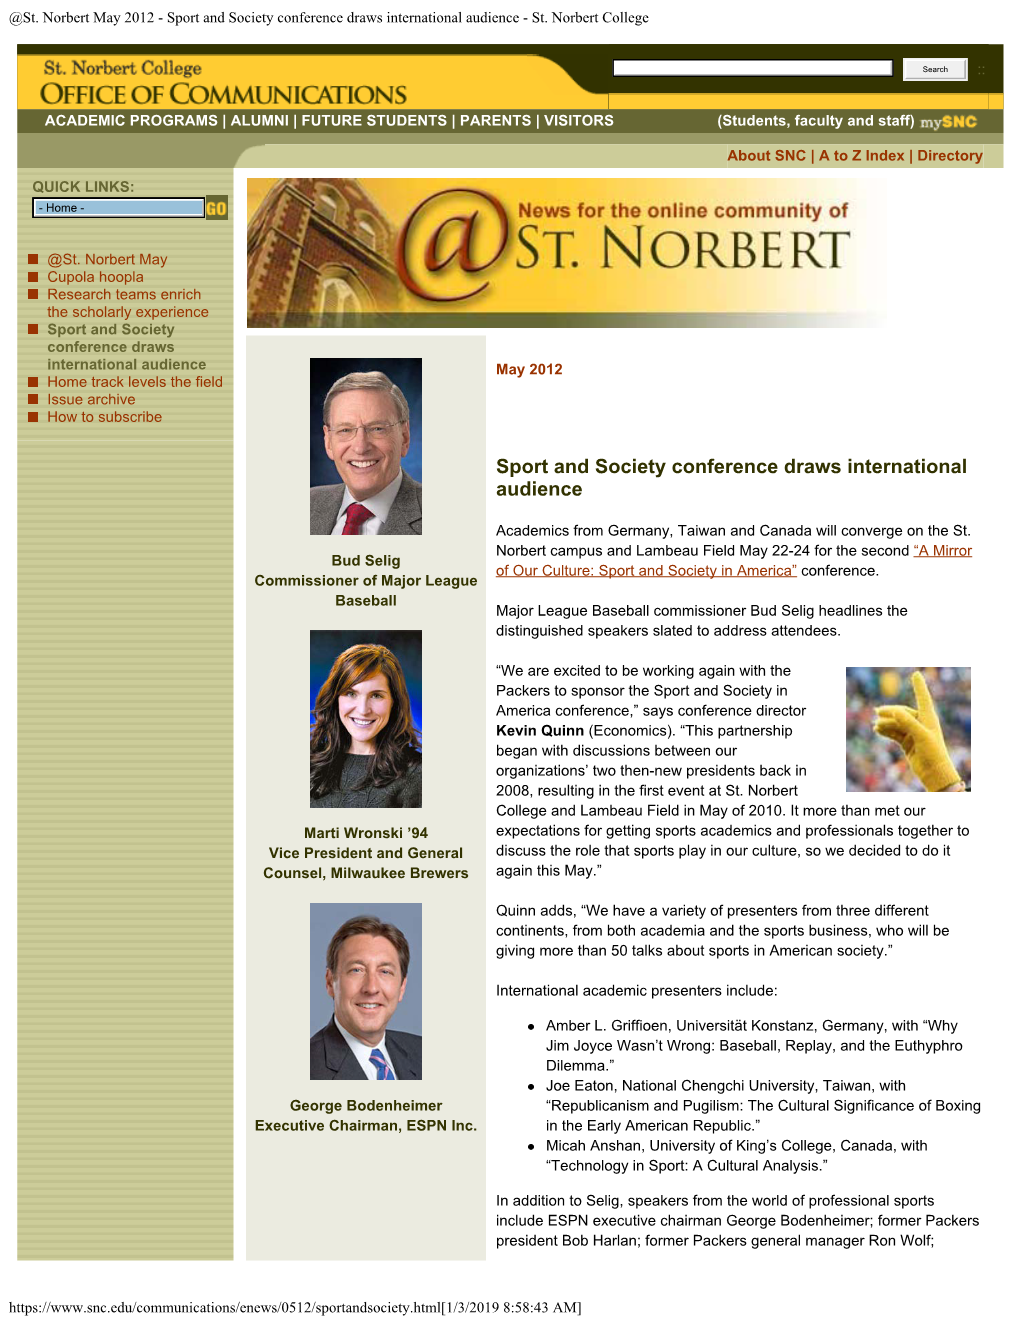 St. Norbert May 2012 - Sport and Society Conference Draws International Audience - St